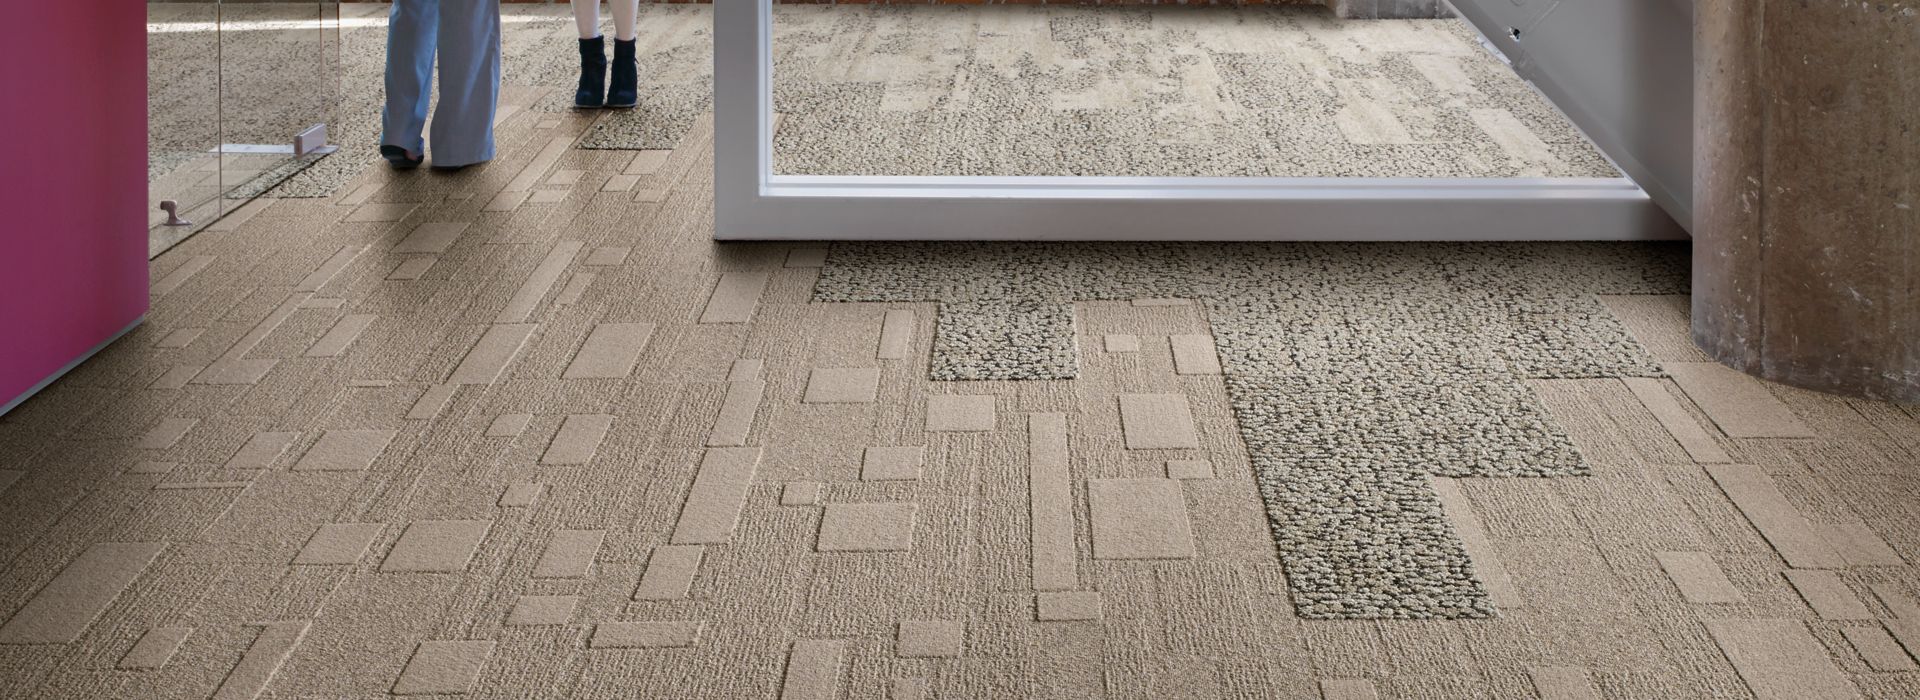 Interface EM552 plank carpet tile in with diagnal column and two women talking